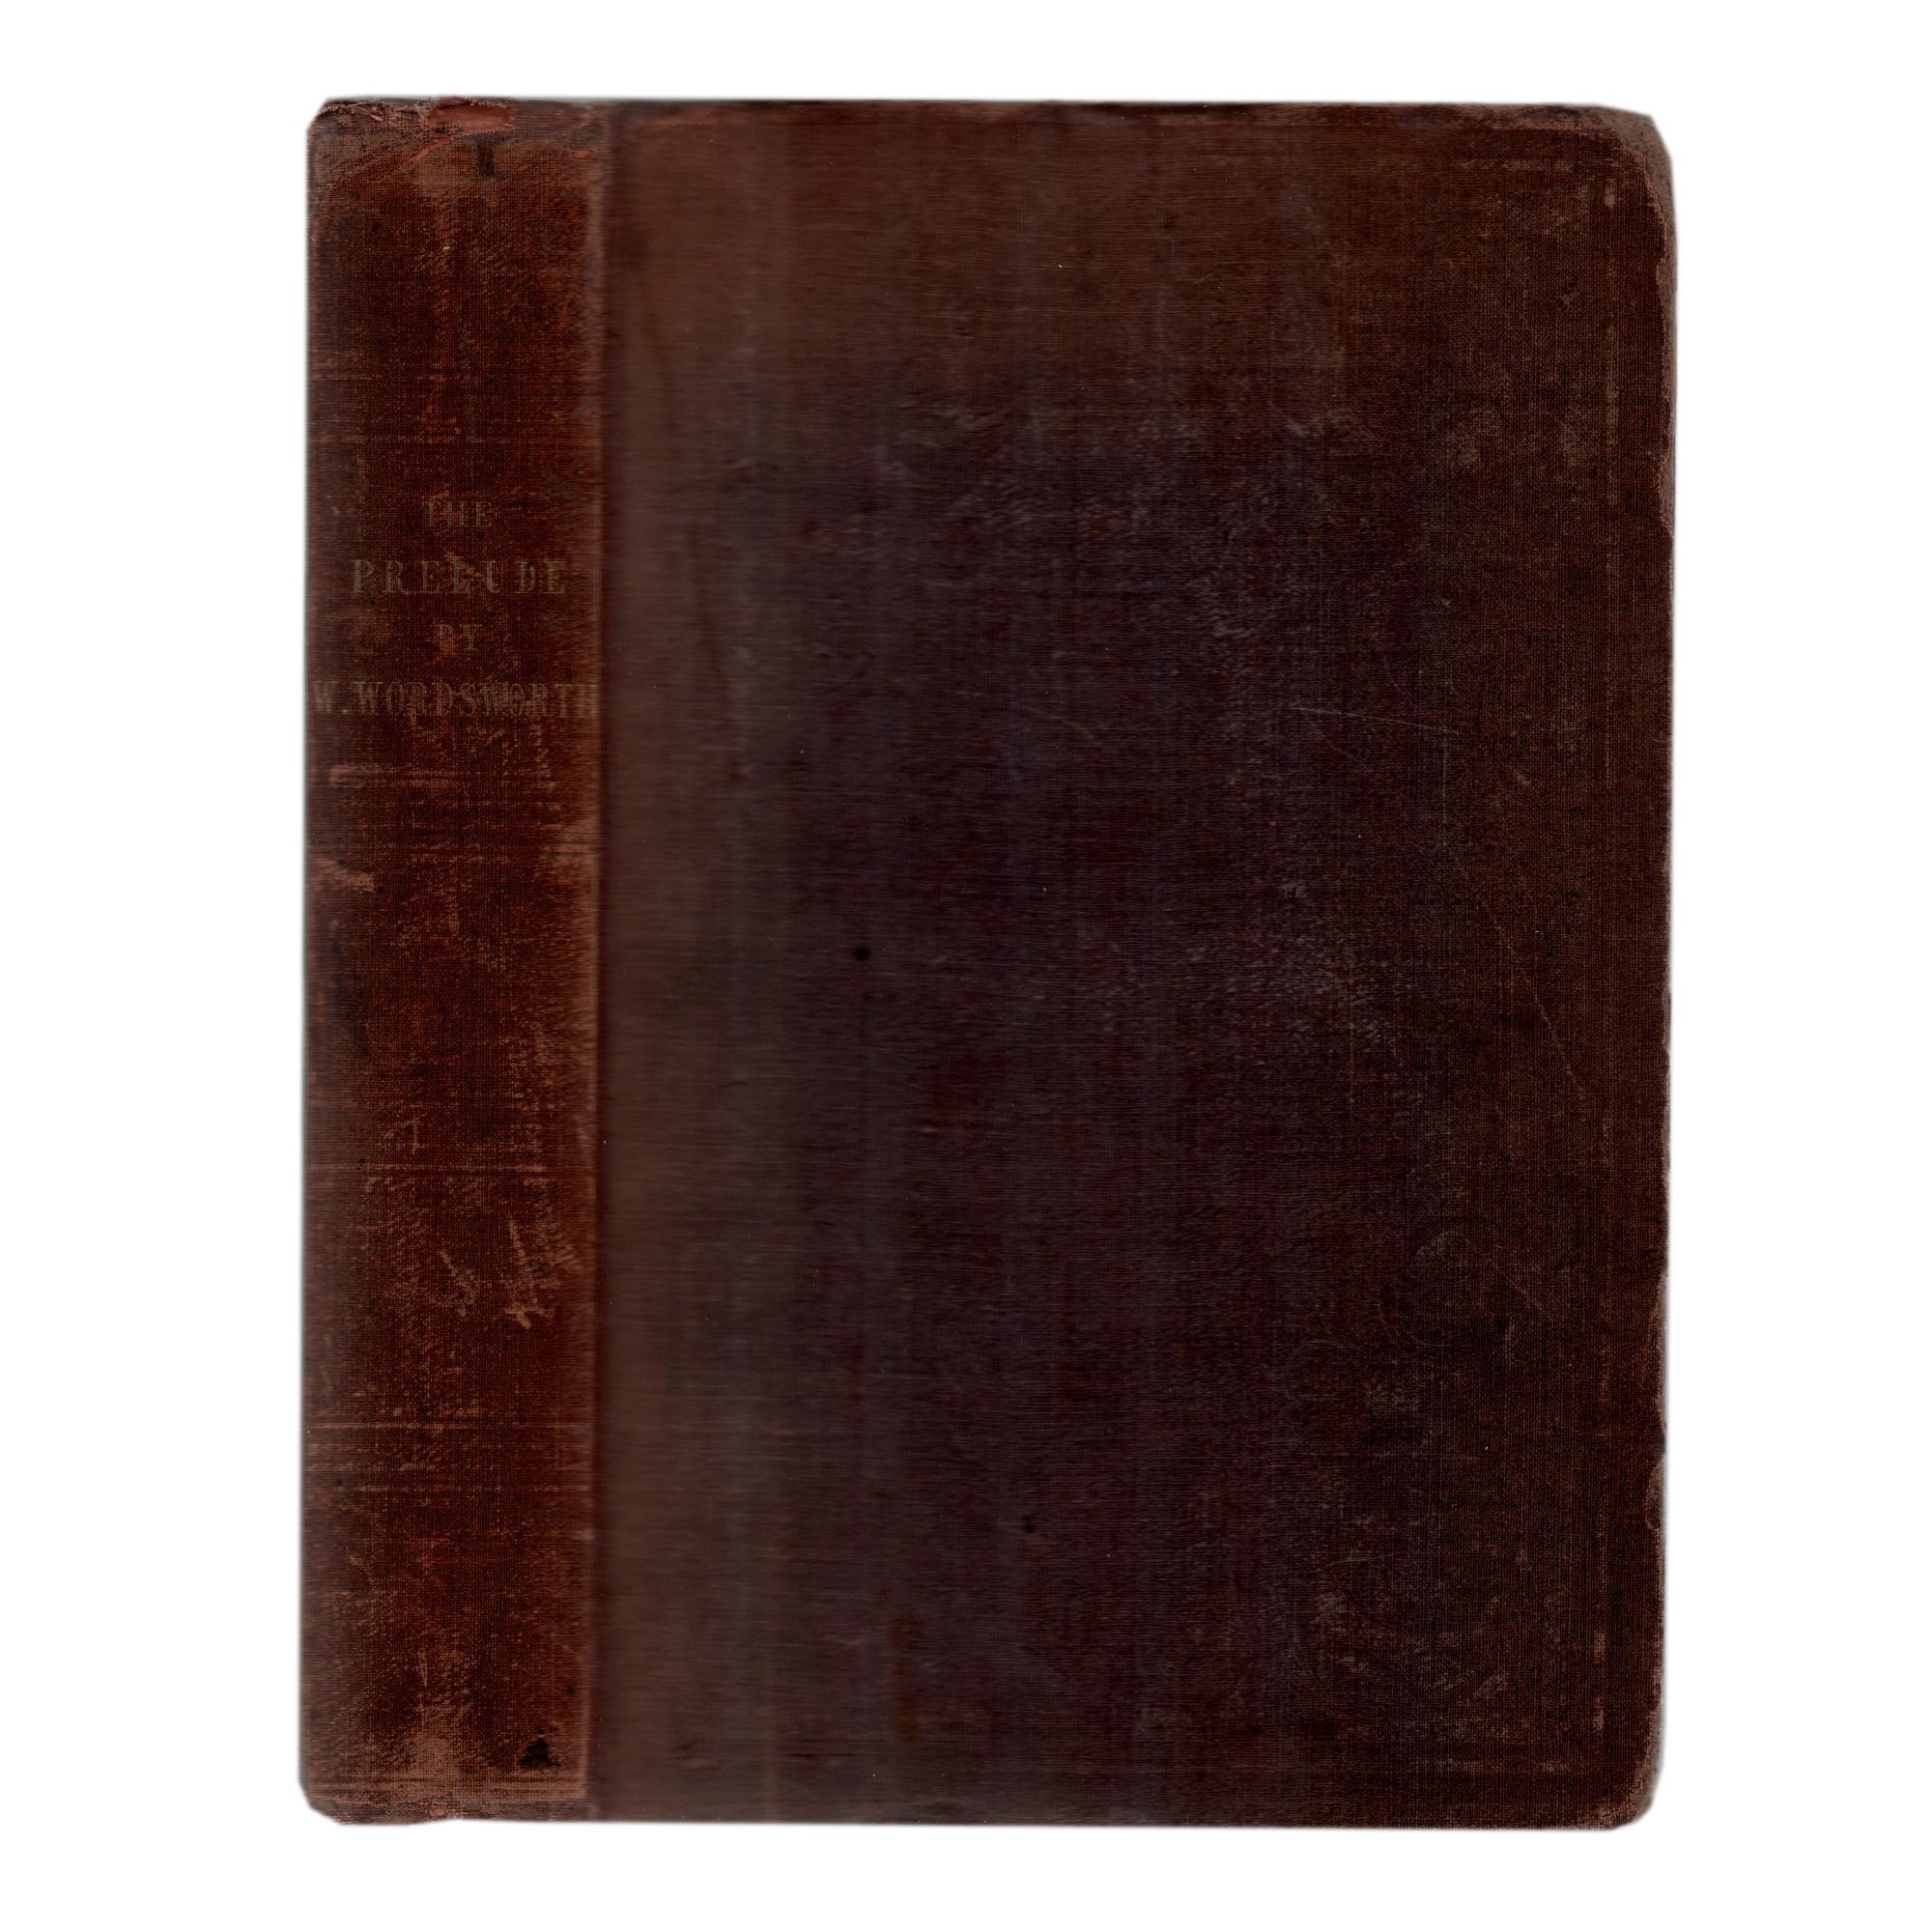 William Wordsworth's The Prelude, First Edition 1850 In Fair Condition For Sale In Suwanee, GA